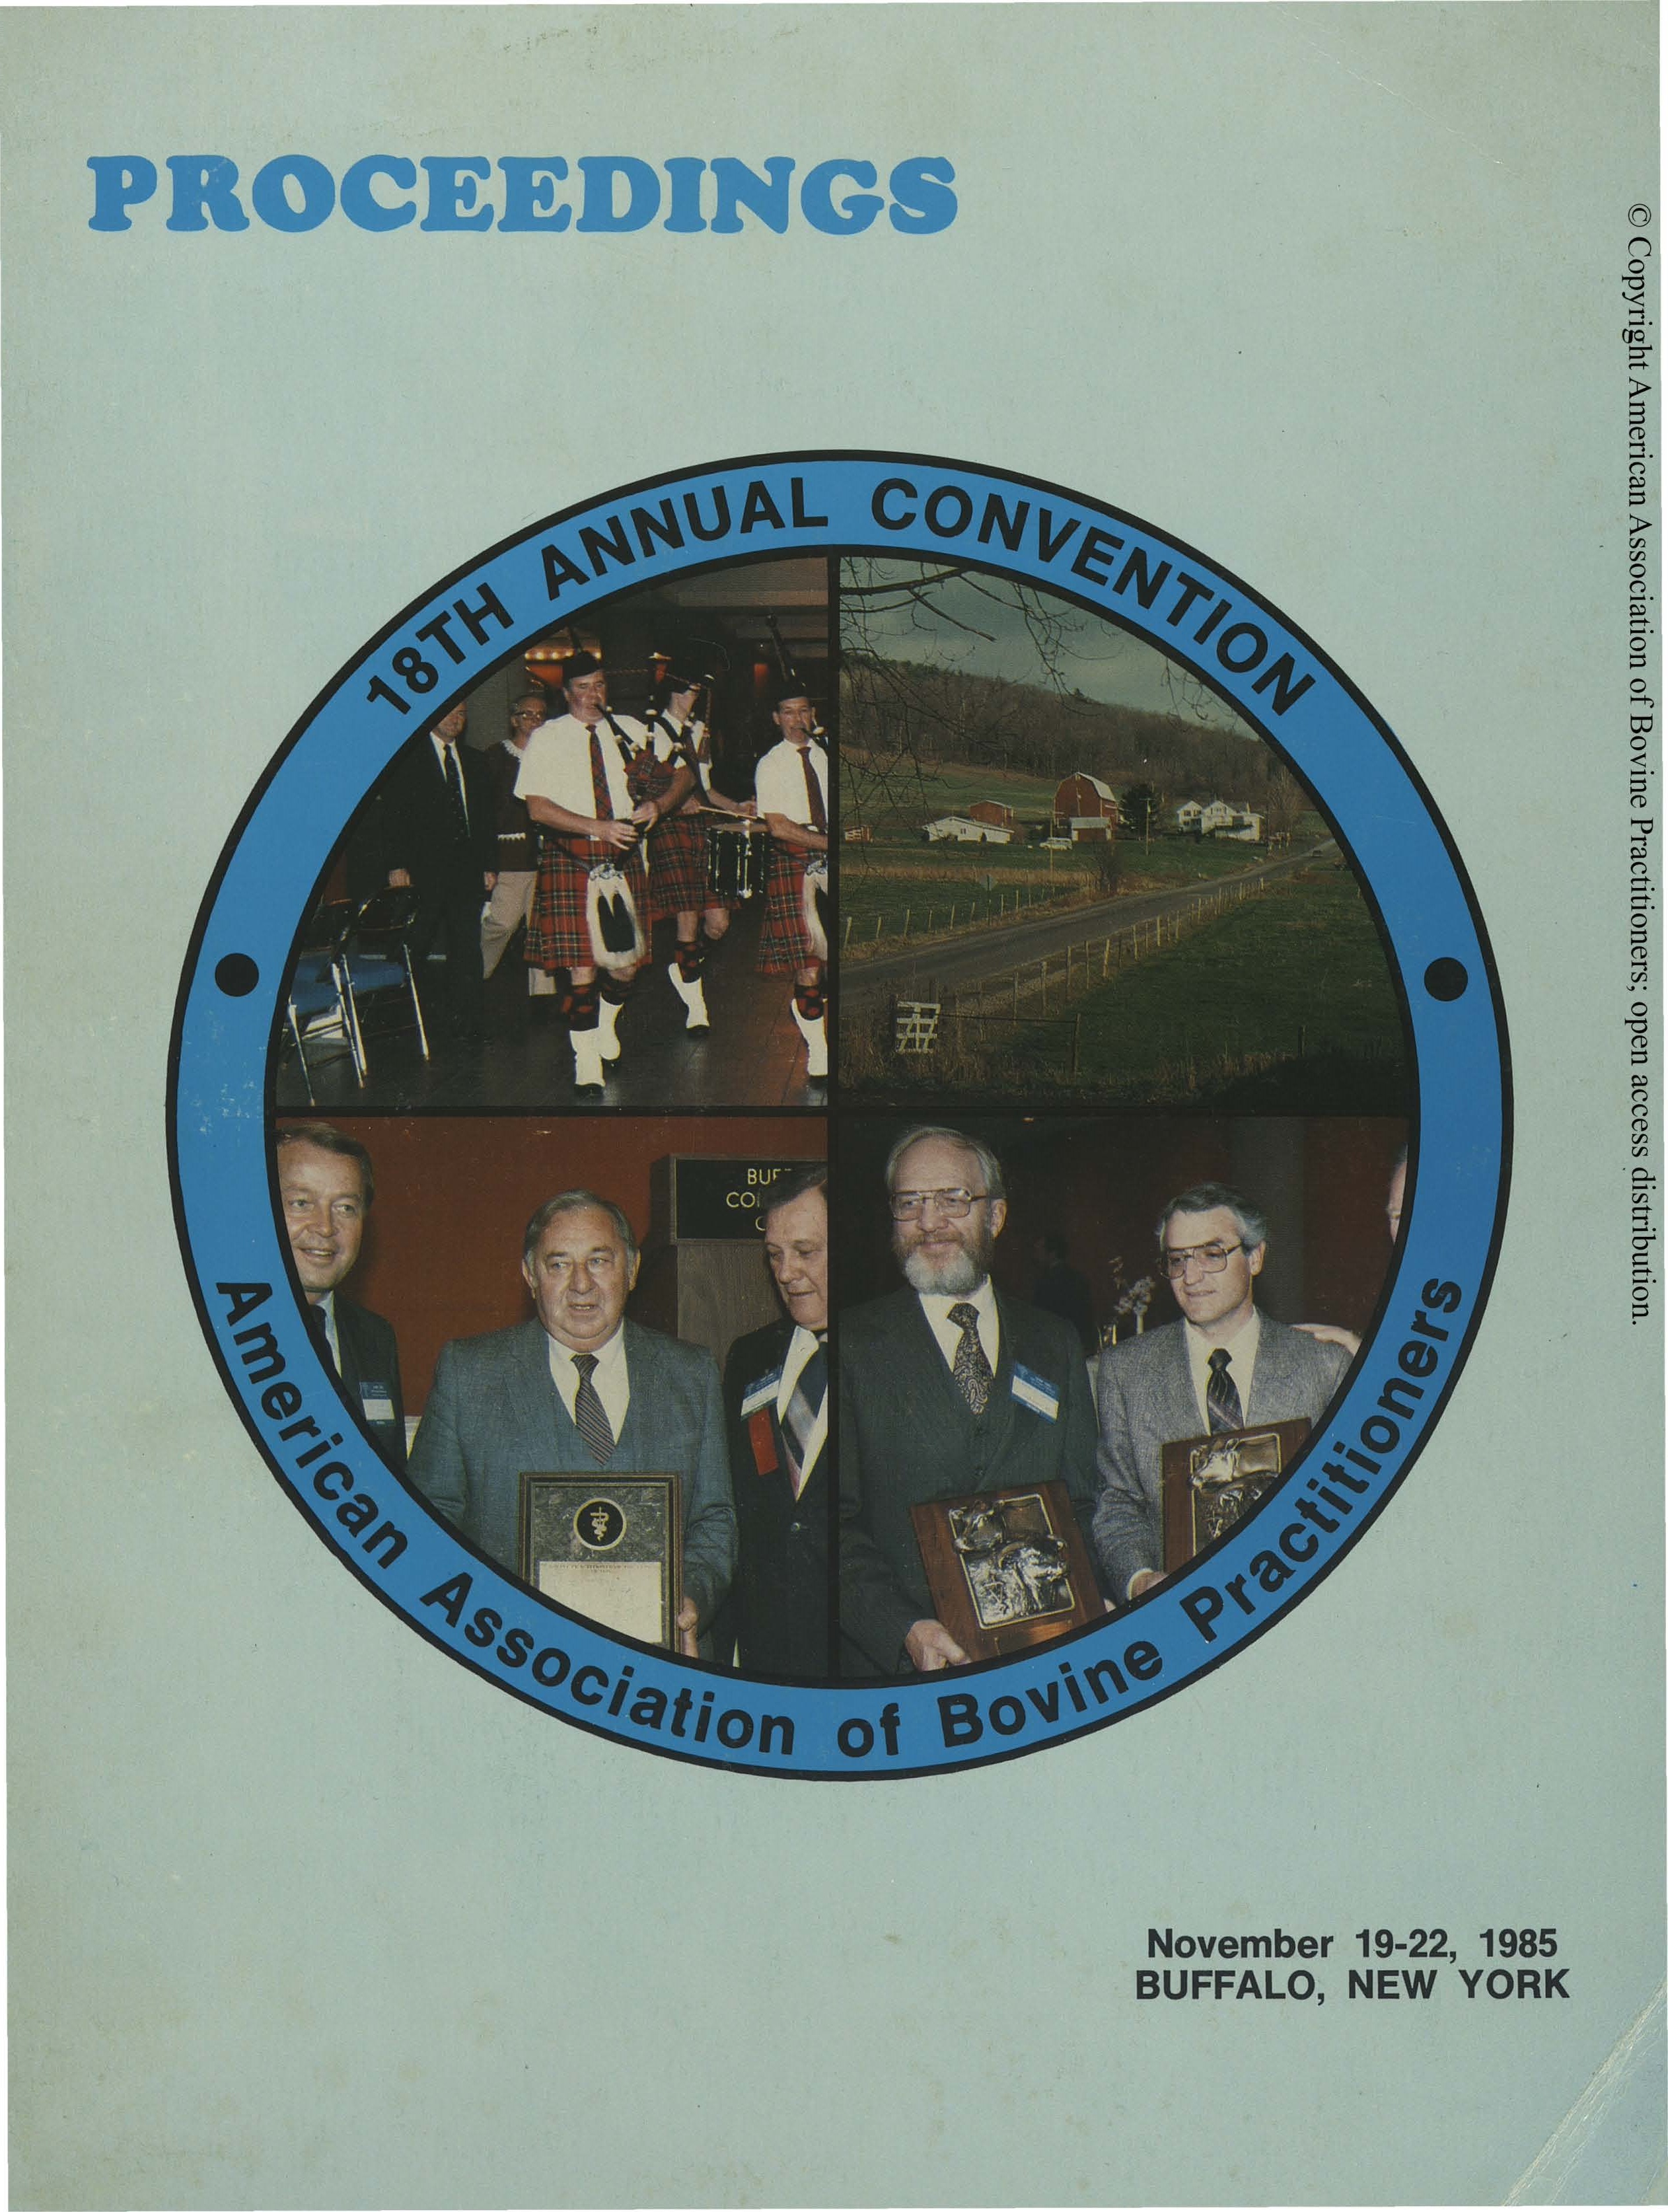 Cover image of the 19th Conference Proceedings: four photos are displayed as quadrents in a circle. From the top right proceeding clockwise, they are a photo of an idyllic farm, two photos of recipients of AABP awards, and a photo of a piper in a kilt.